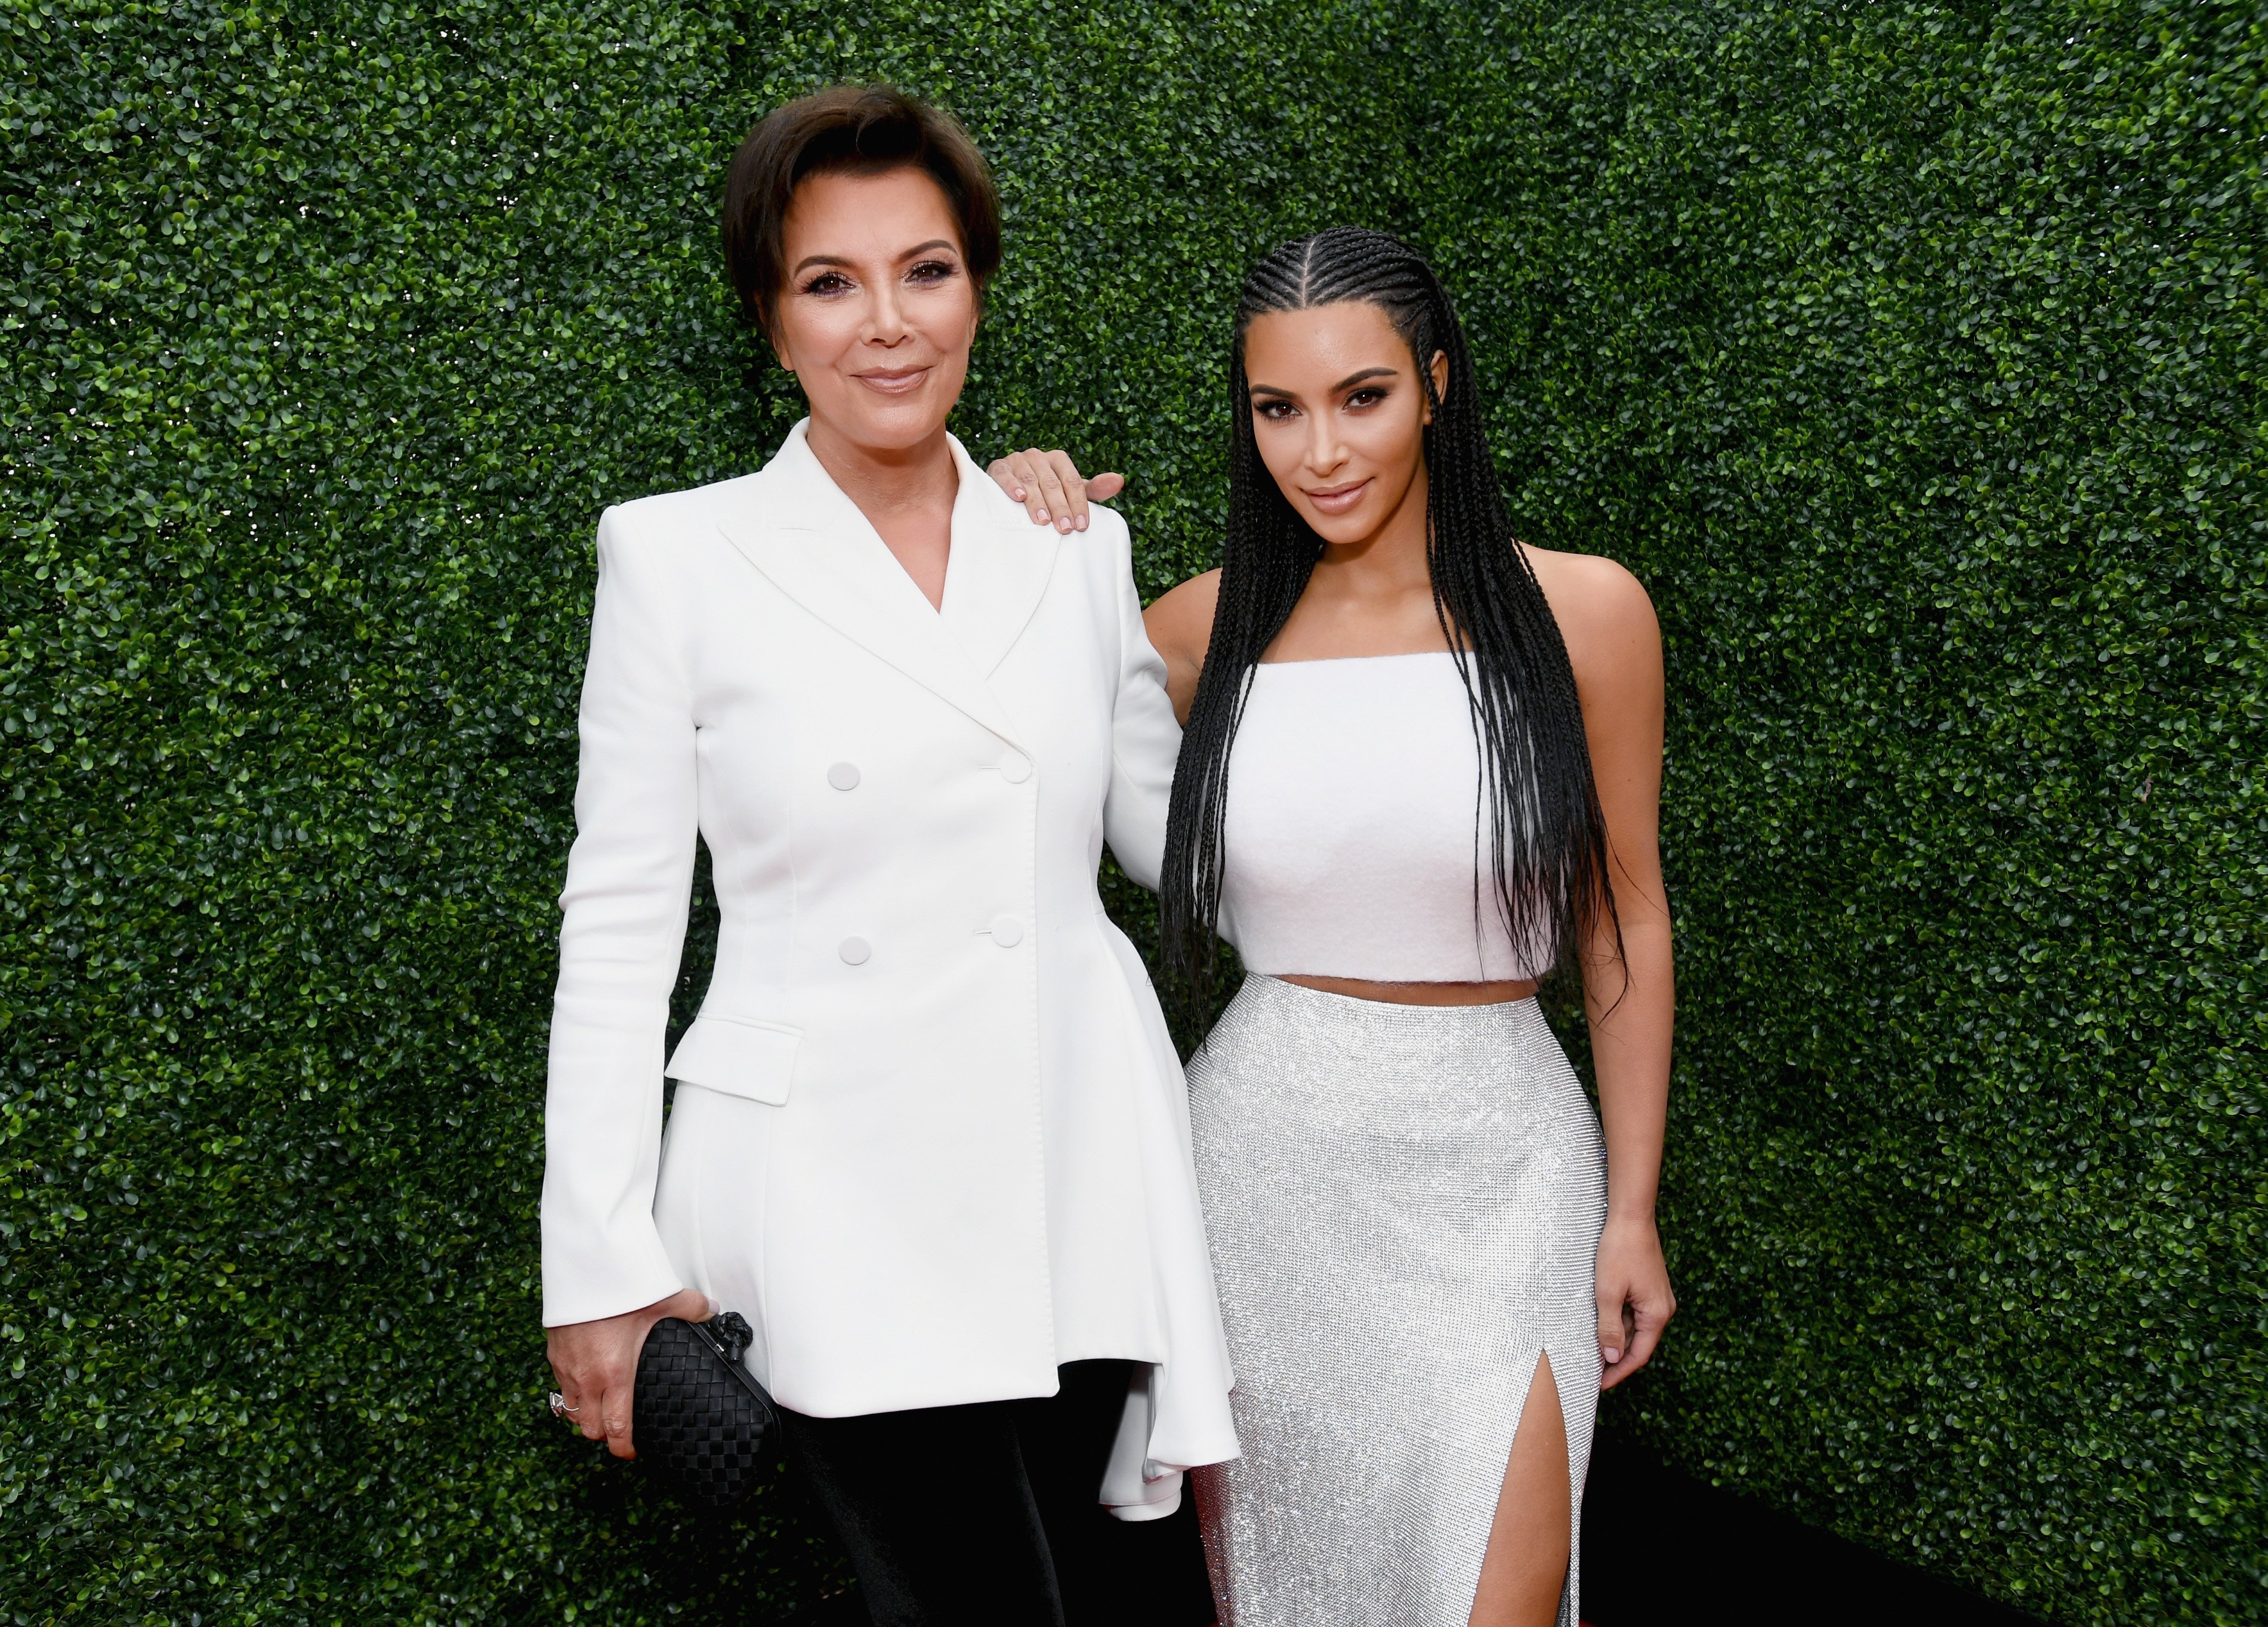 Kris Jenner (L) and Kim Kardashian attend the 2018 MTV Movie And TV Awards at Barker Hangar on June 16, 2018, in Santa Monica, California. | Source: Getty Images.